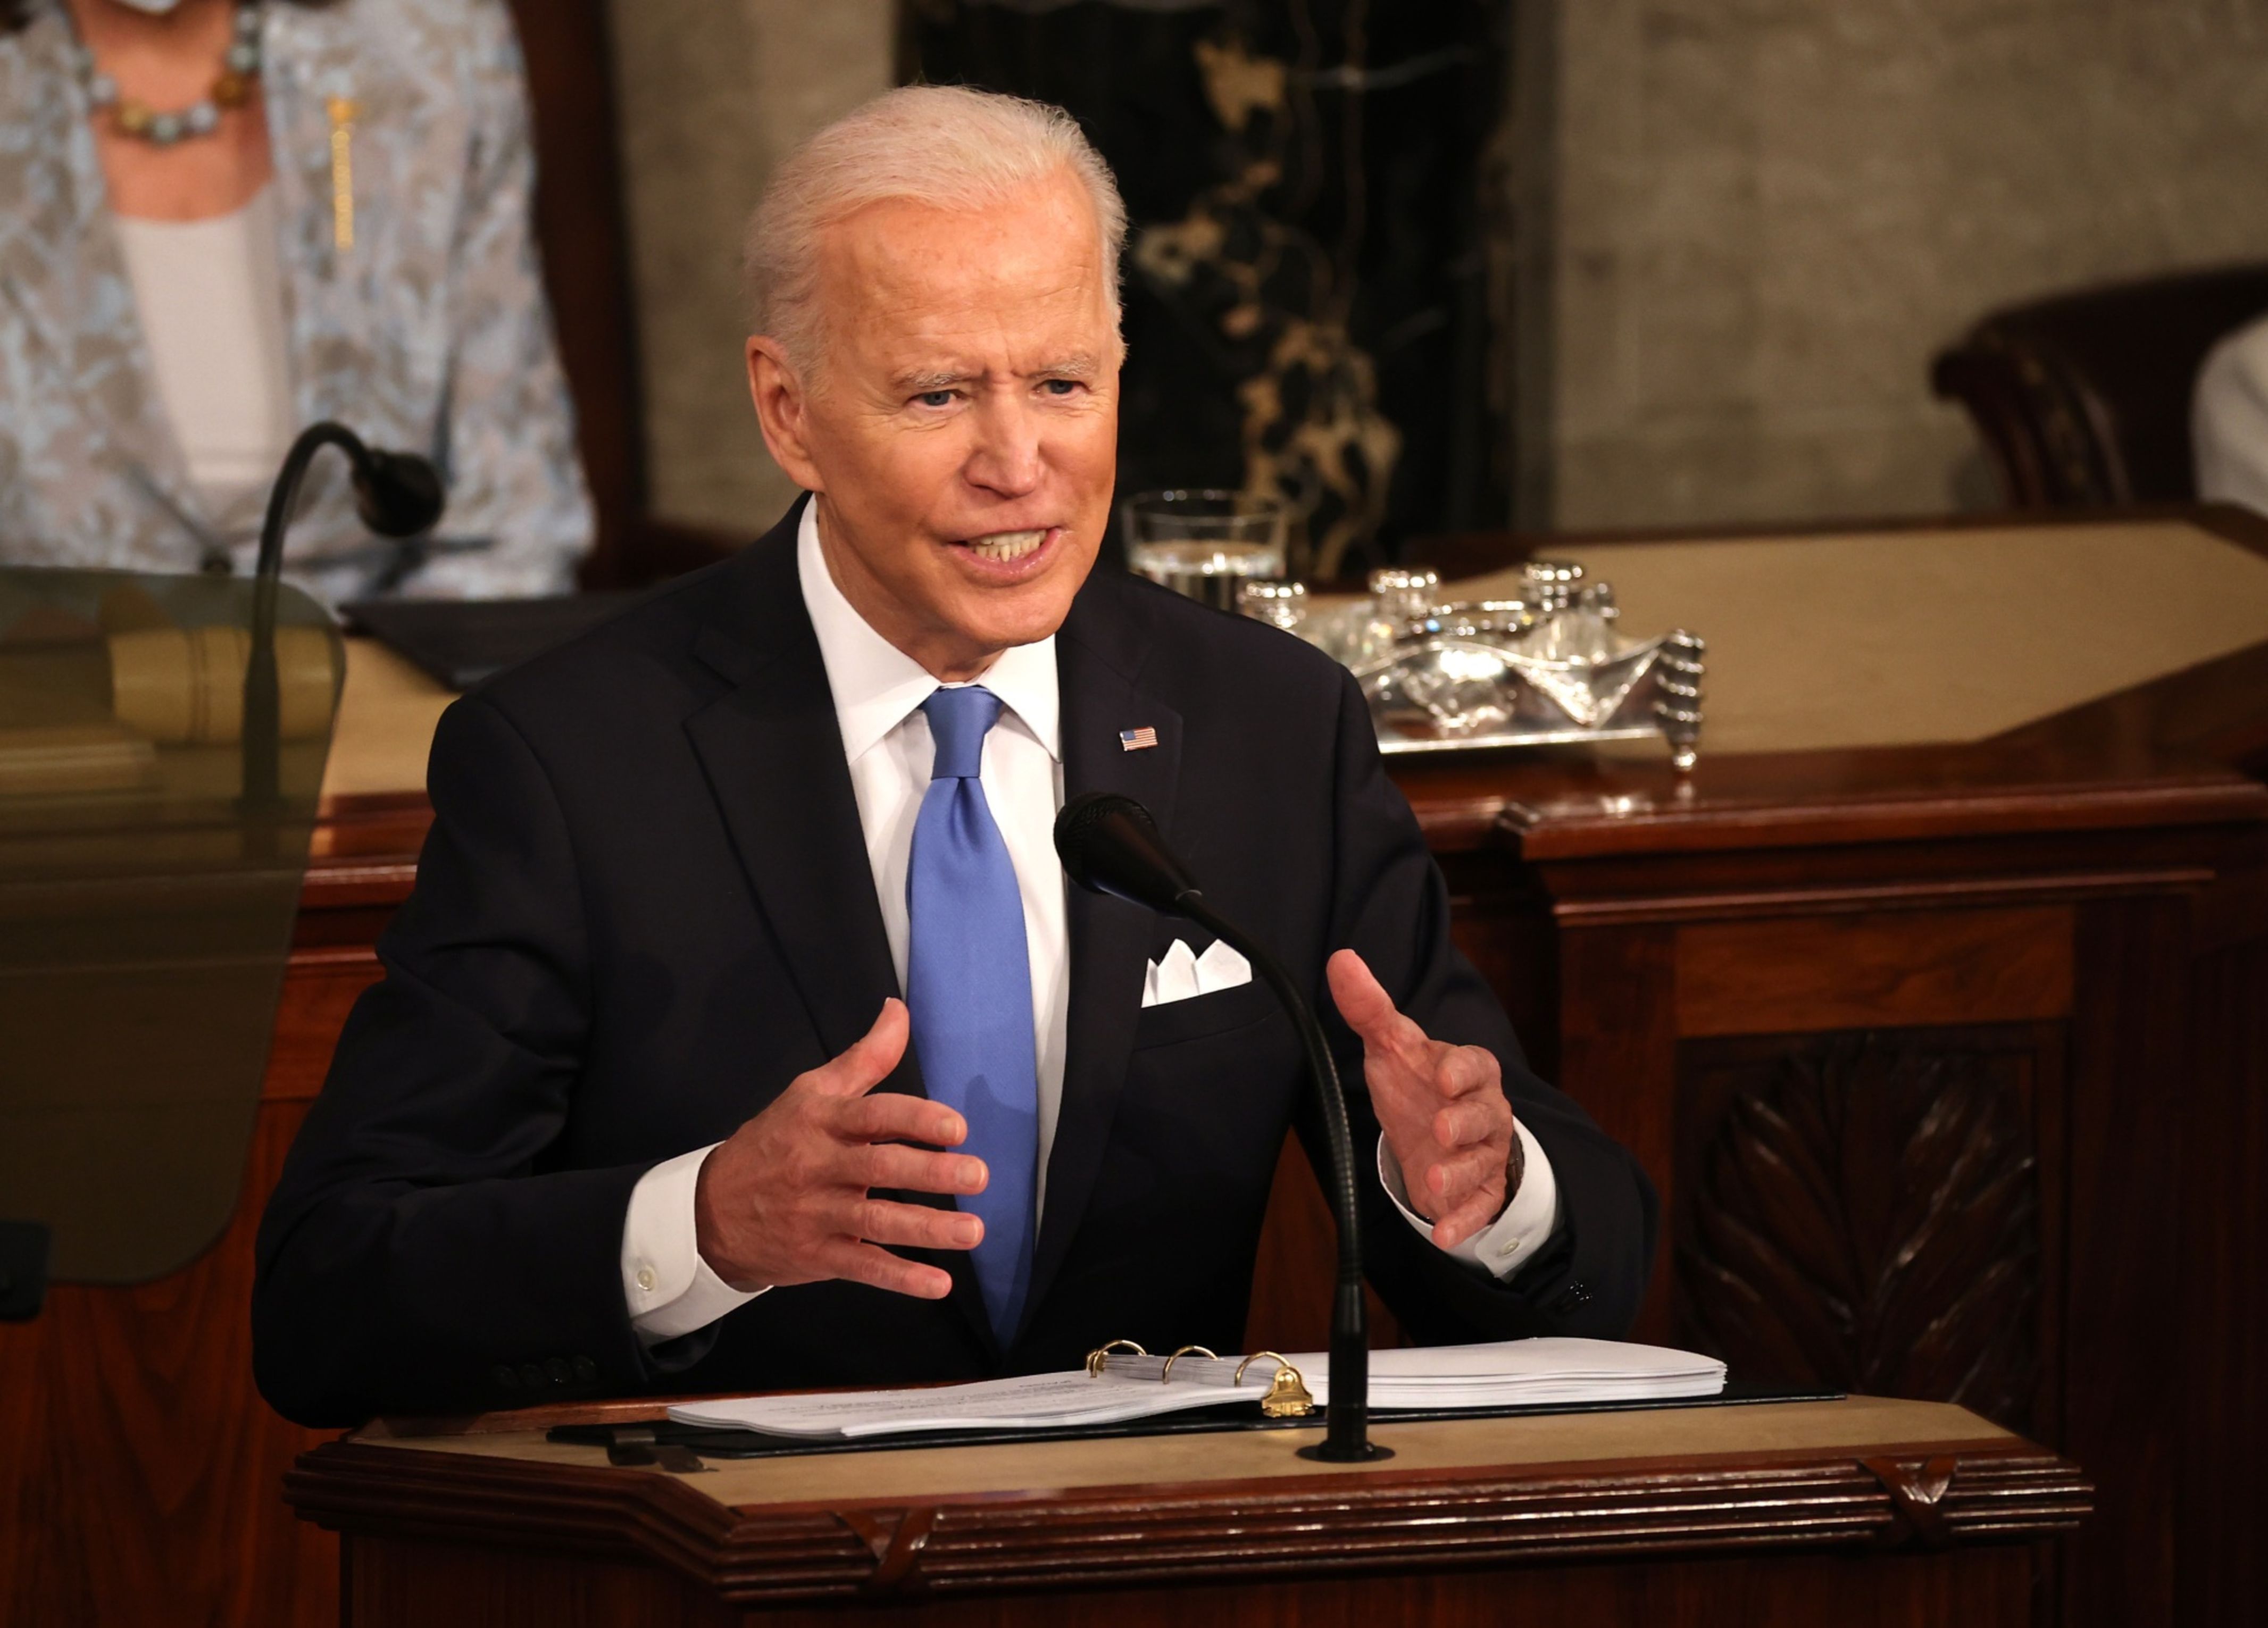 Lawmakers question Biden budget as tax experts plan ahead